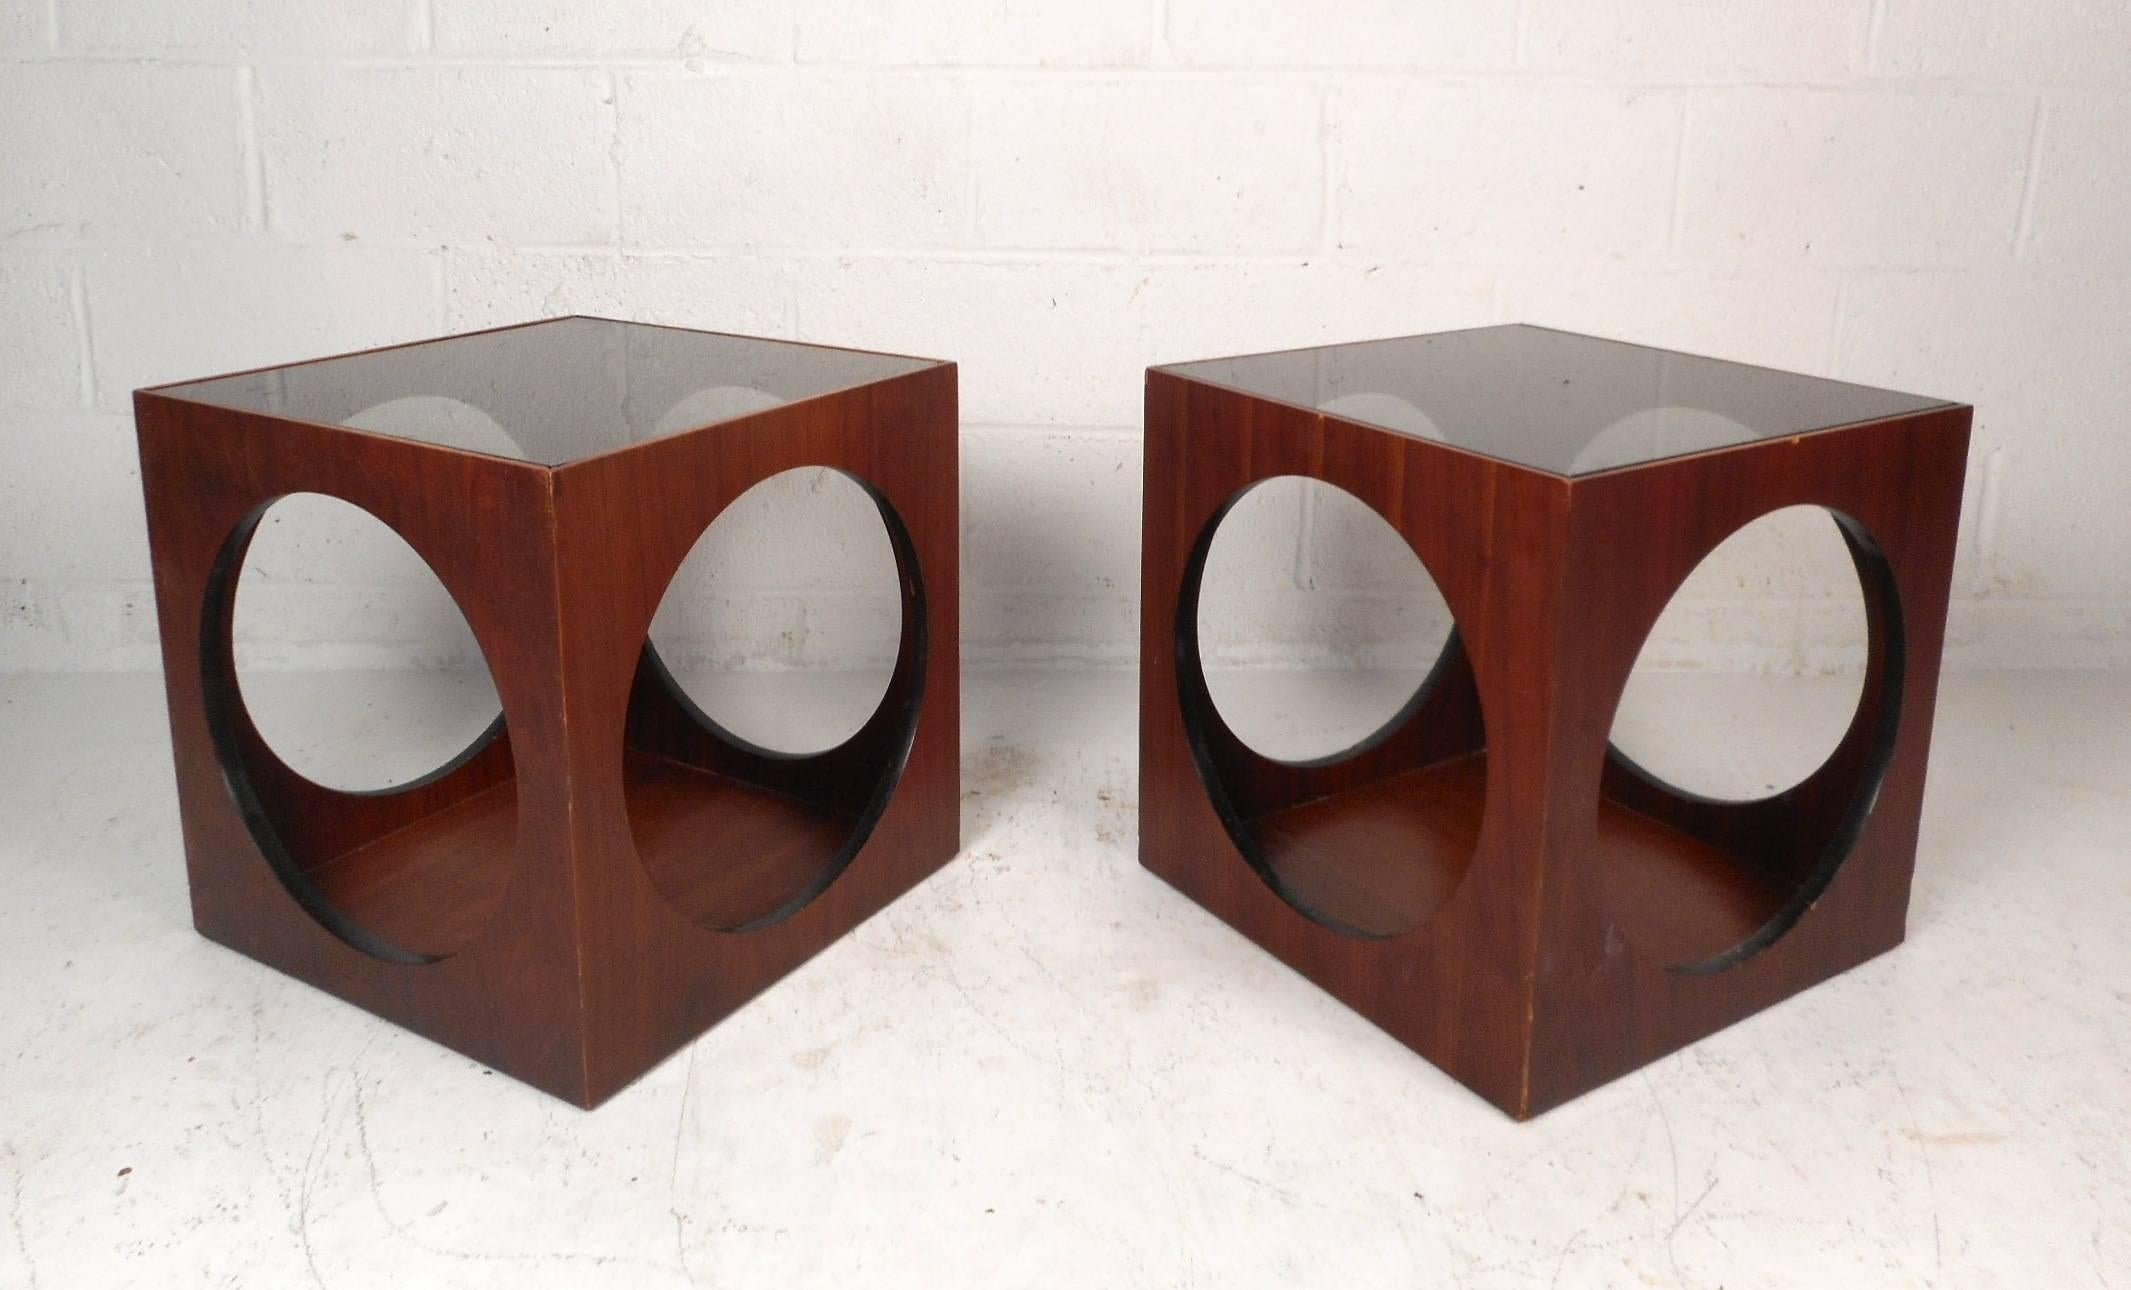 This beautiful pair of vintage modern end tables are designed in the style of Lane Furniture. Stylish design with unique cut-out sides and a smoked glass insert on the top. Wonderful dark walnut wood grain and the sleek cube shape make this